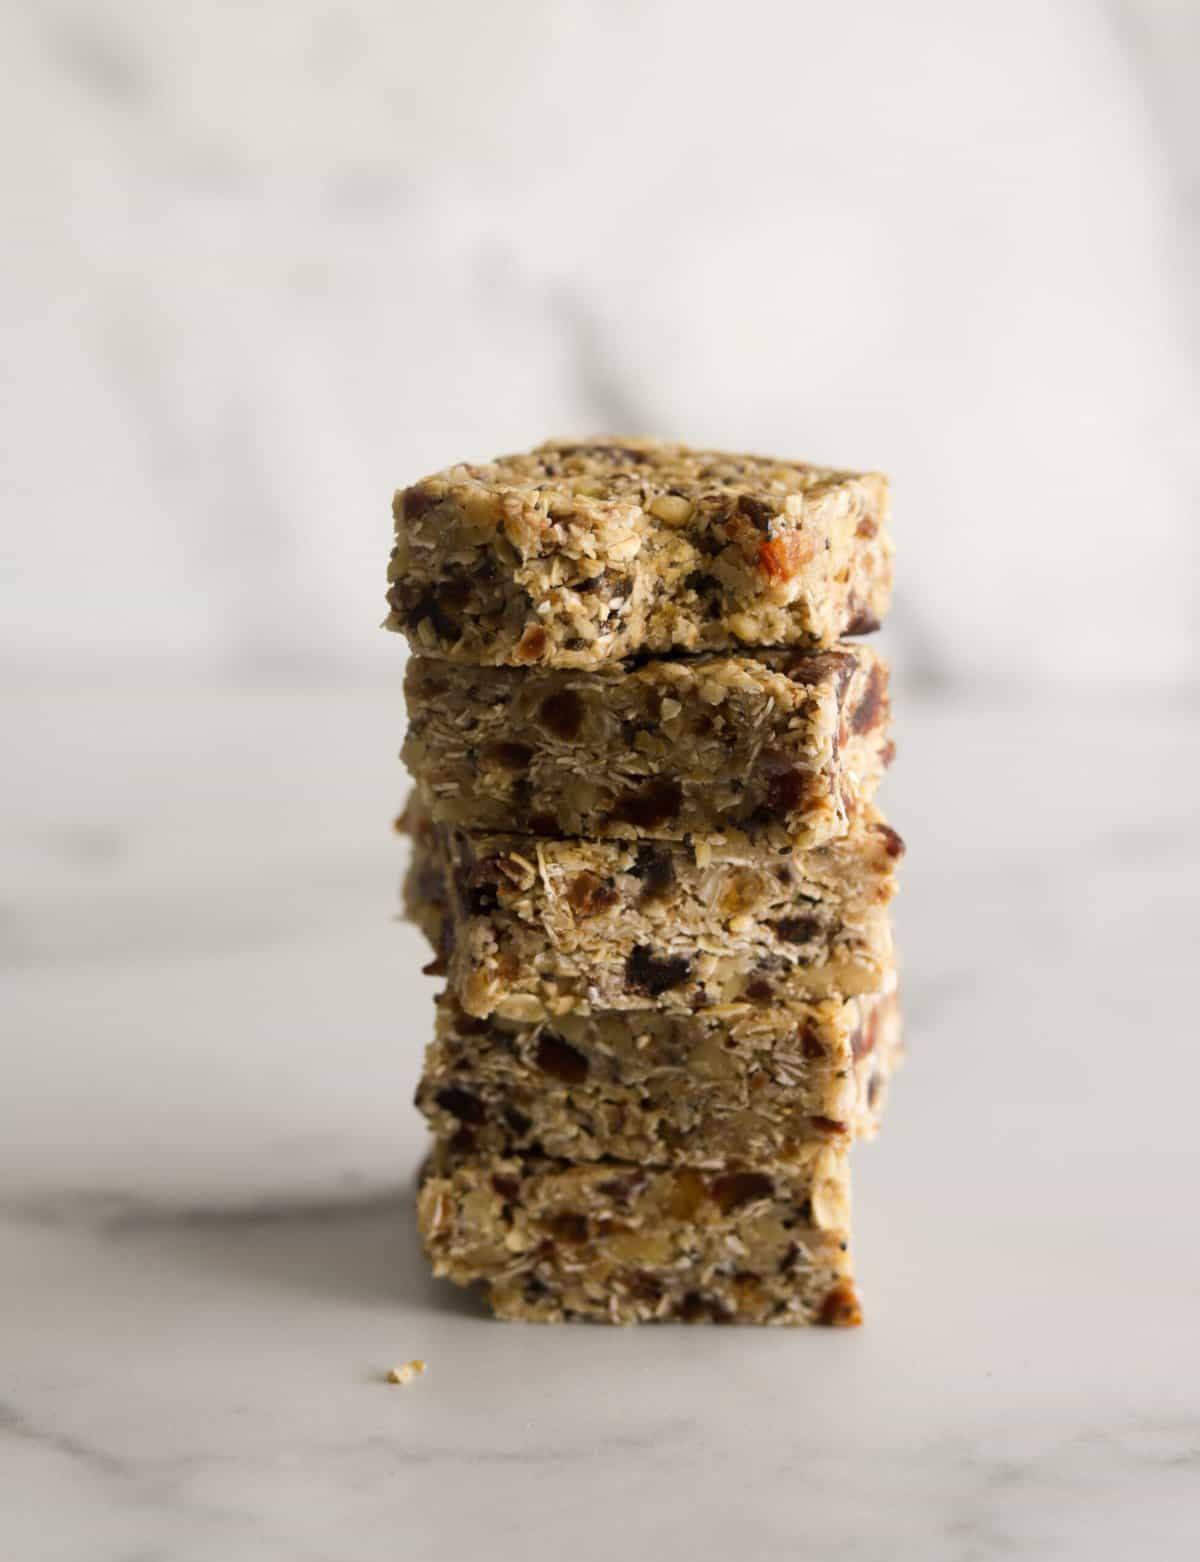 A side shot of stacked walnut oat bars with dates.